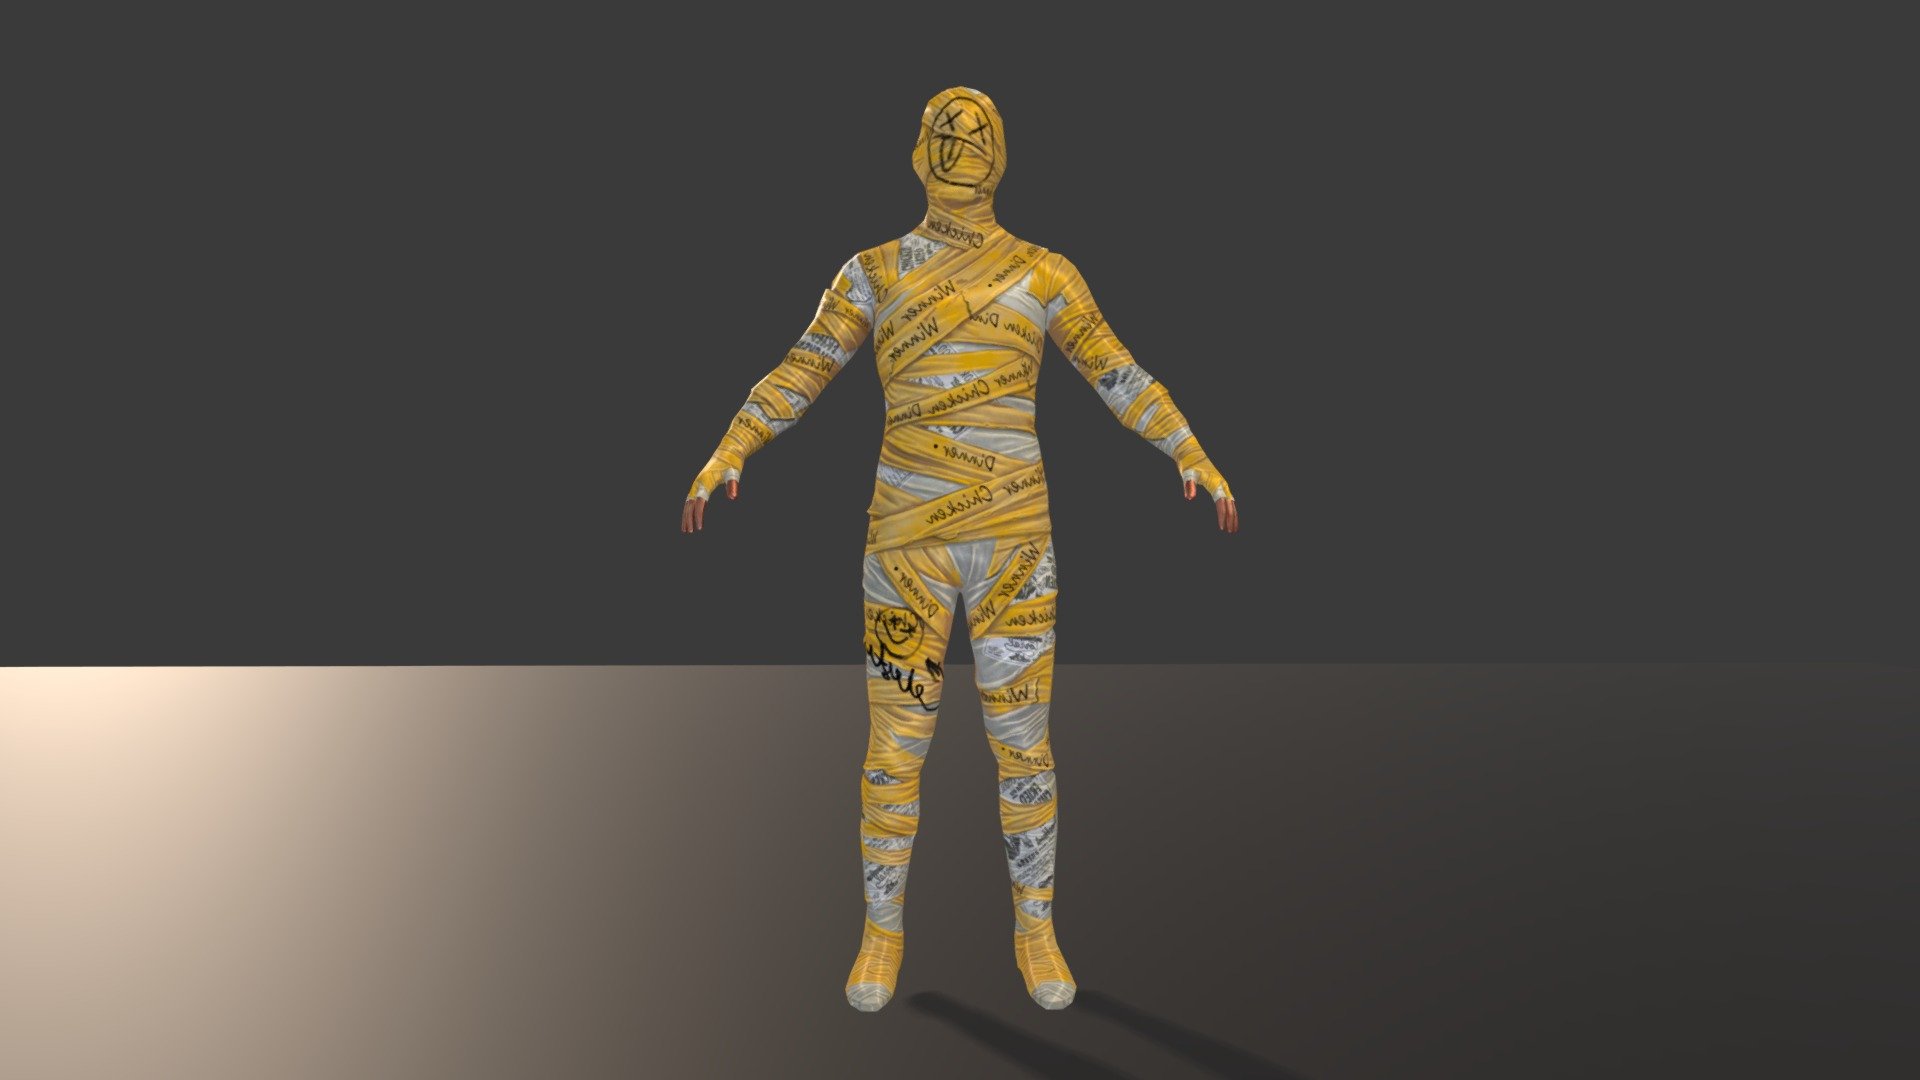 Pubg Mobile Mummy Character 3d Model By Dflex